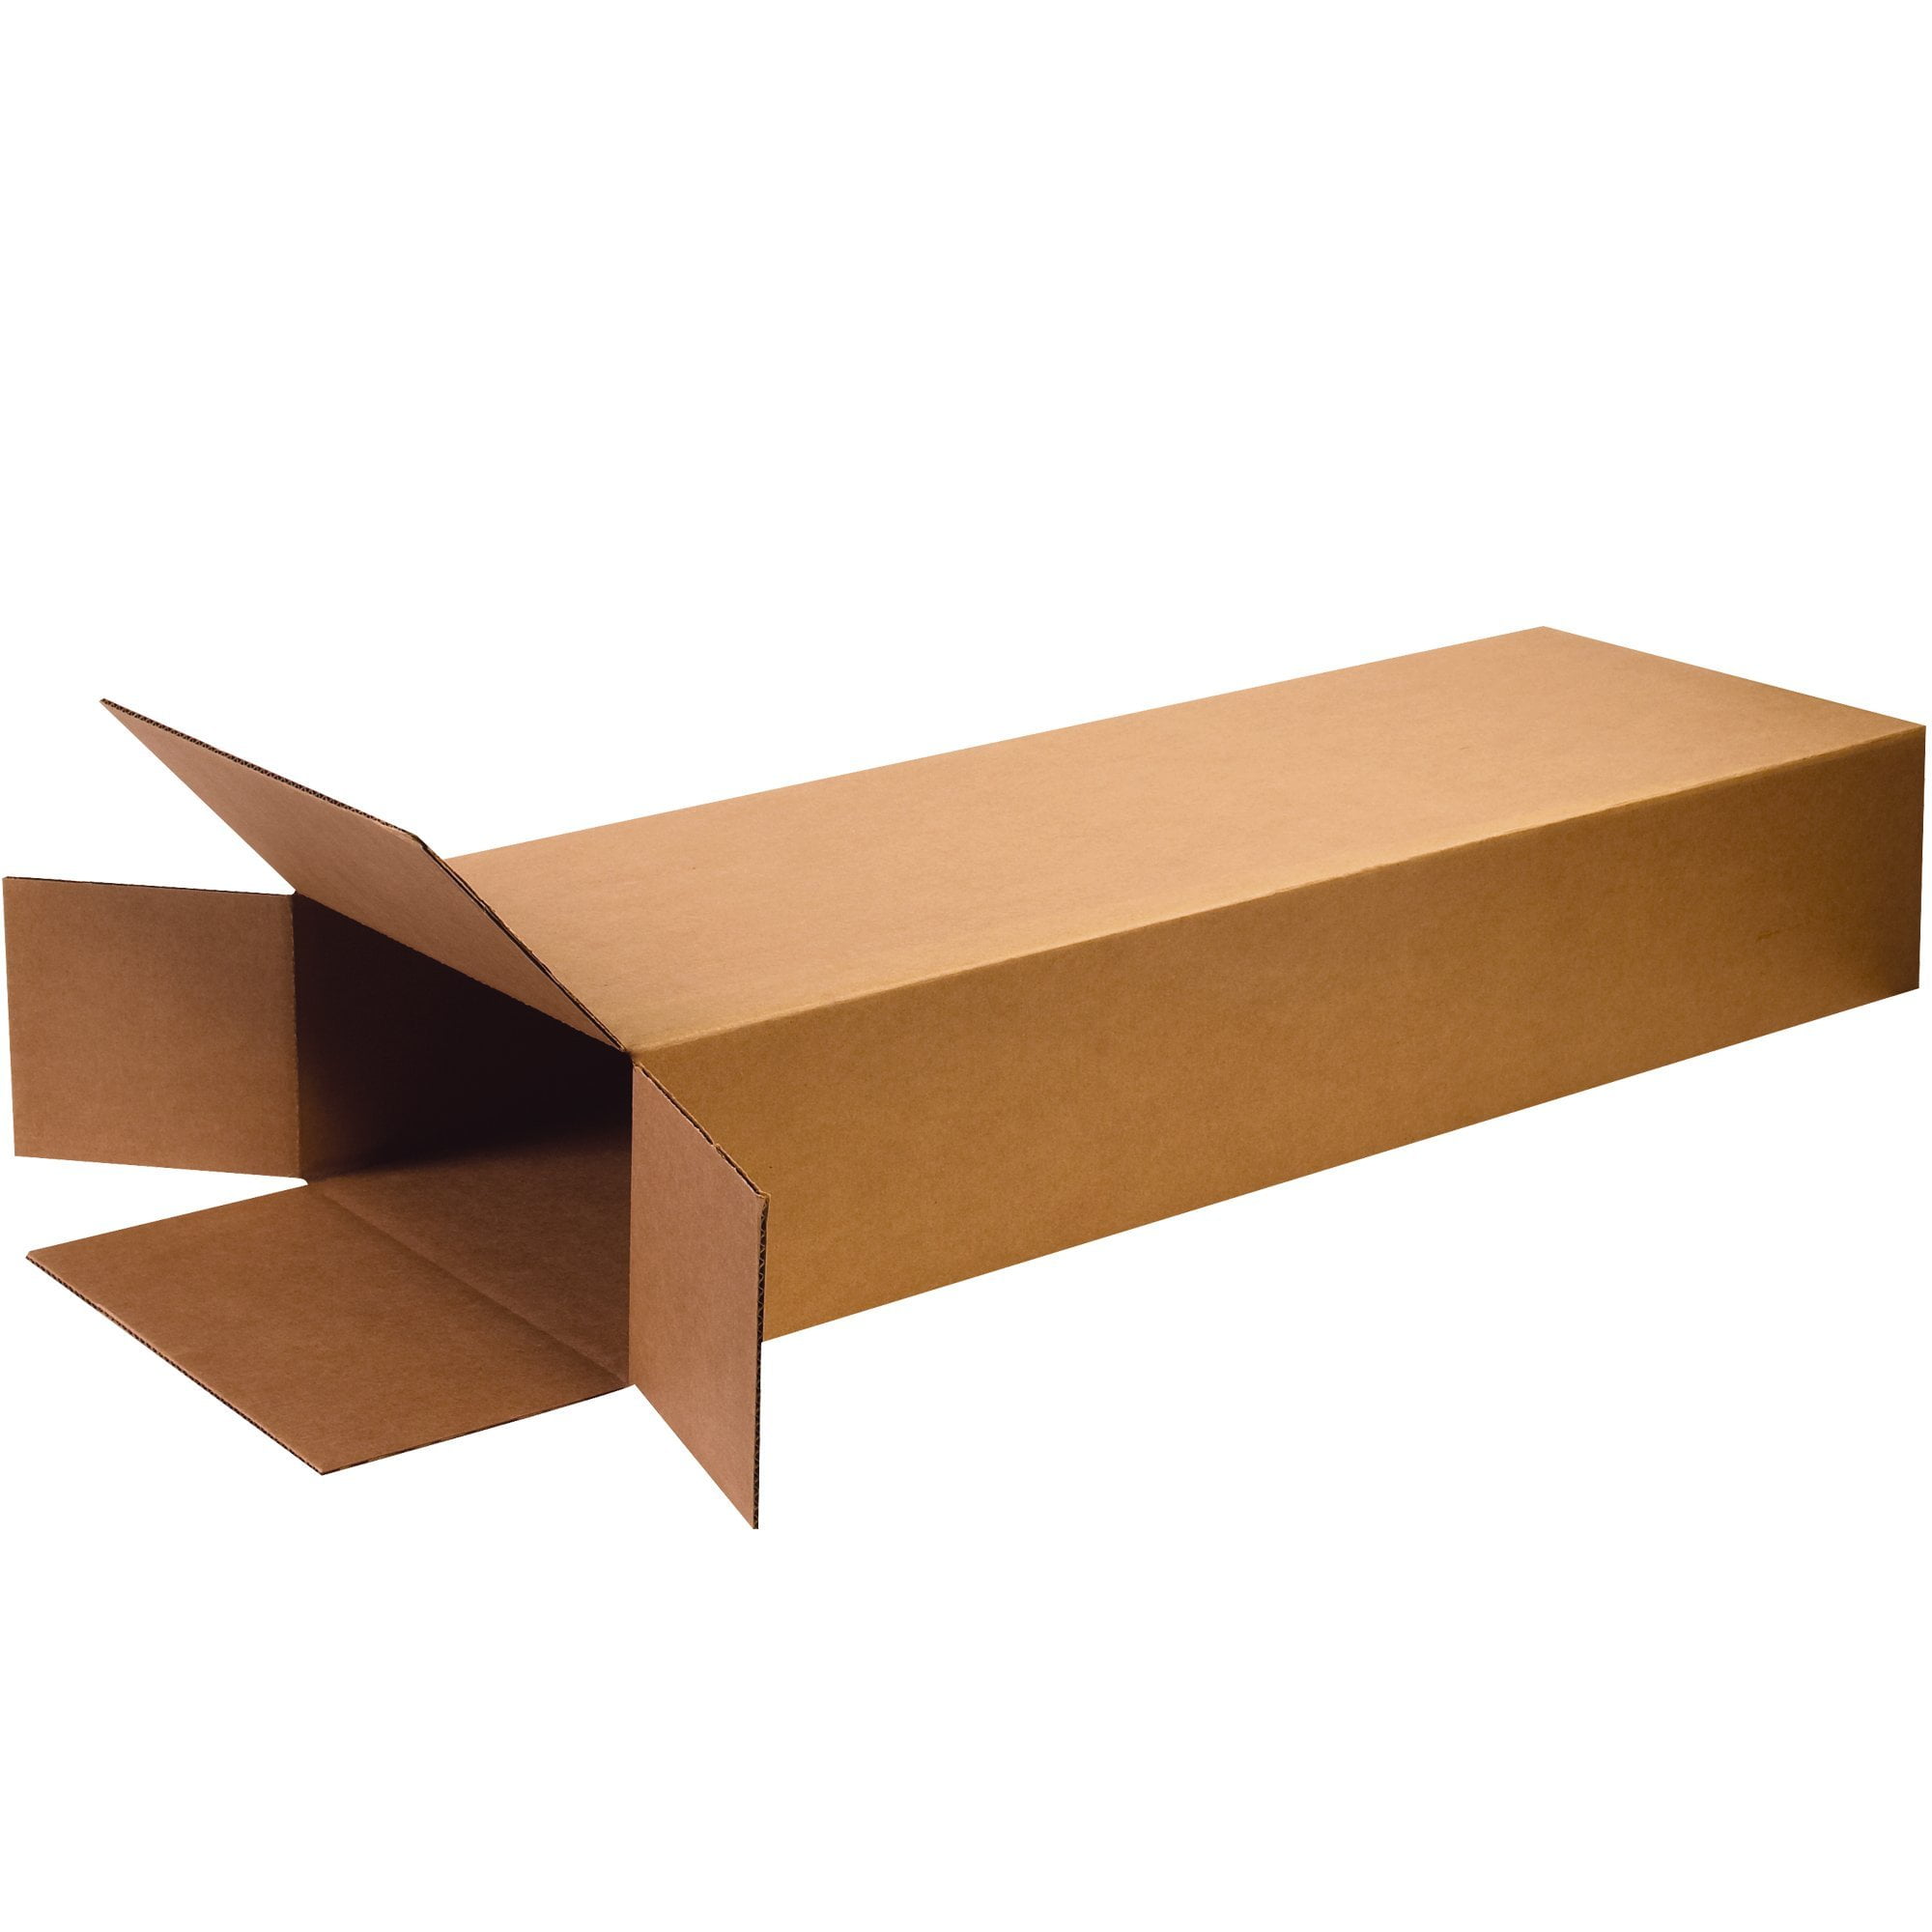 40-22 x 18 x 6 Corrugated Shipping Boxes Packing Storage Cartons Cardboard Box 